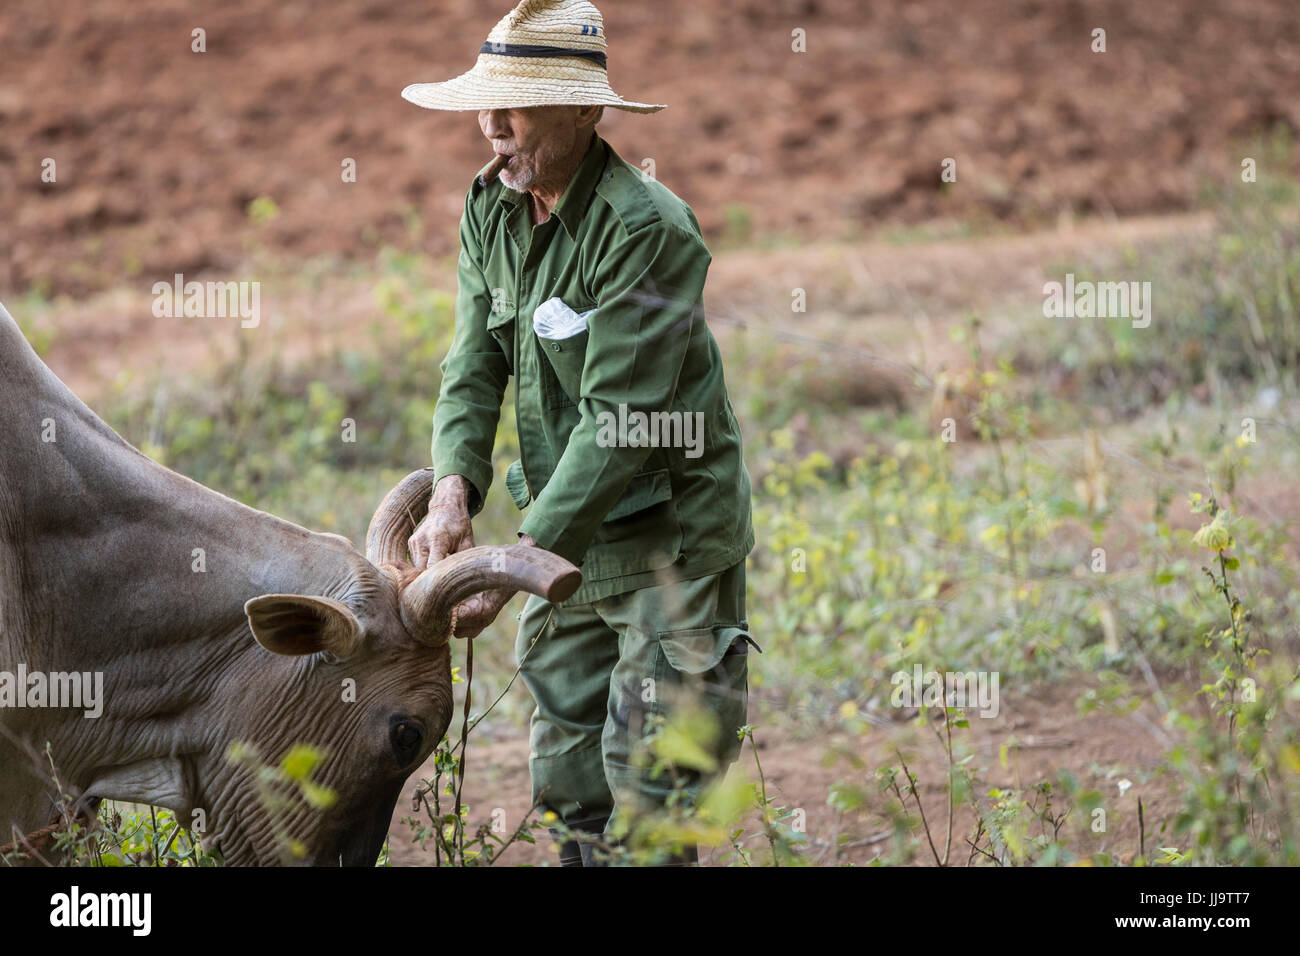 Farmer in Vinales, Cuba moves his cow as he works the tobacco field Stock Photo